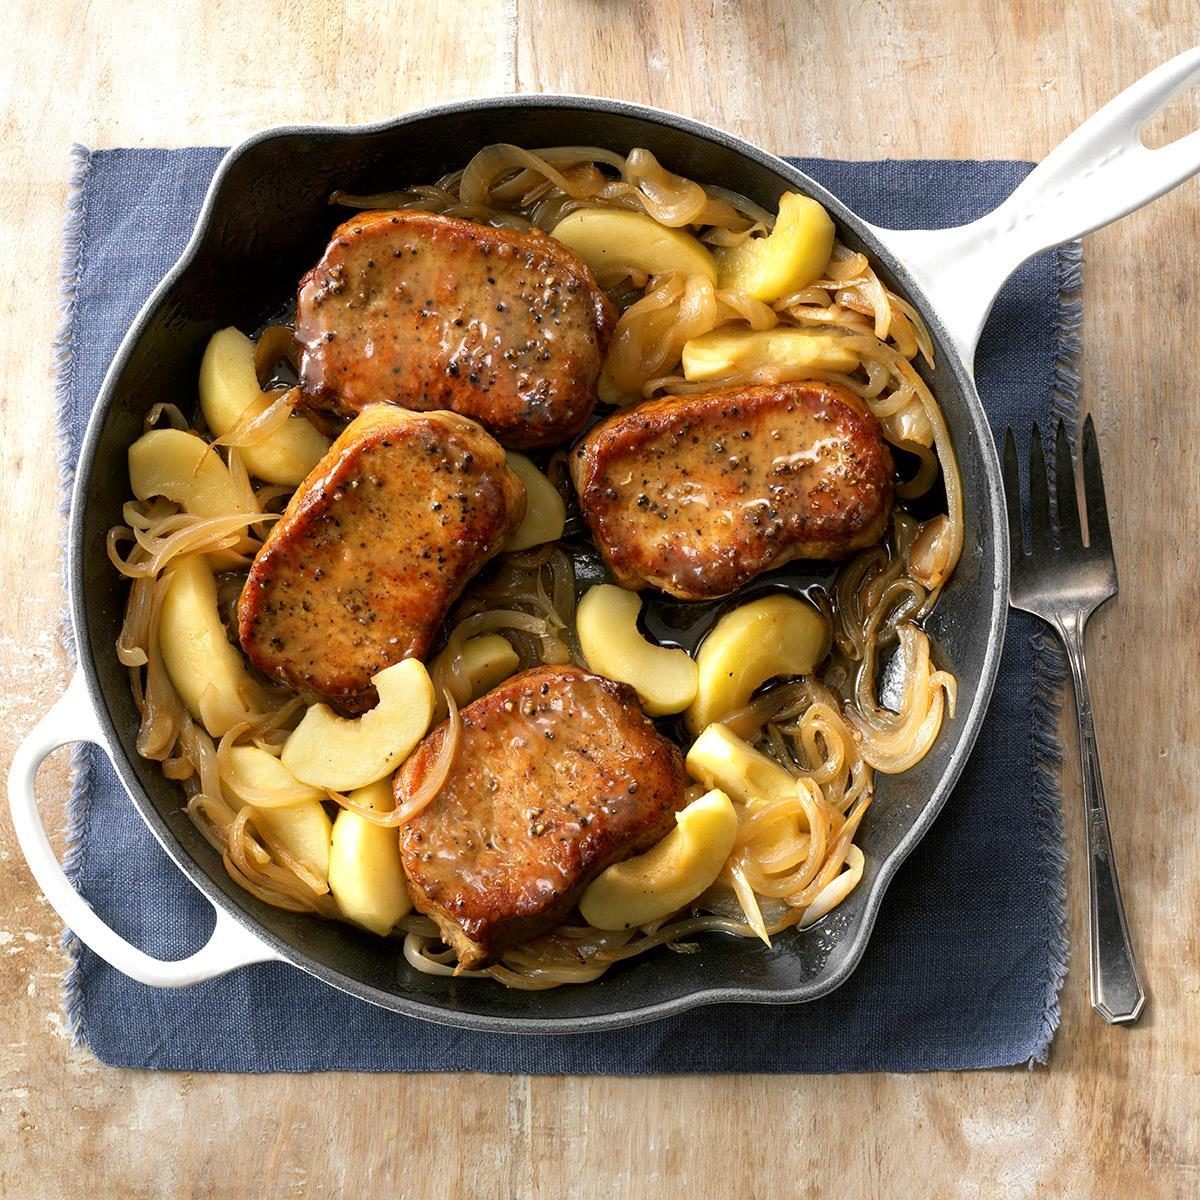 Apples ‘n’ Onion Topped Chops